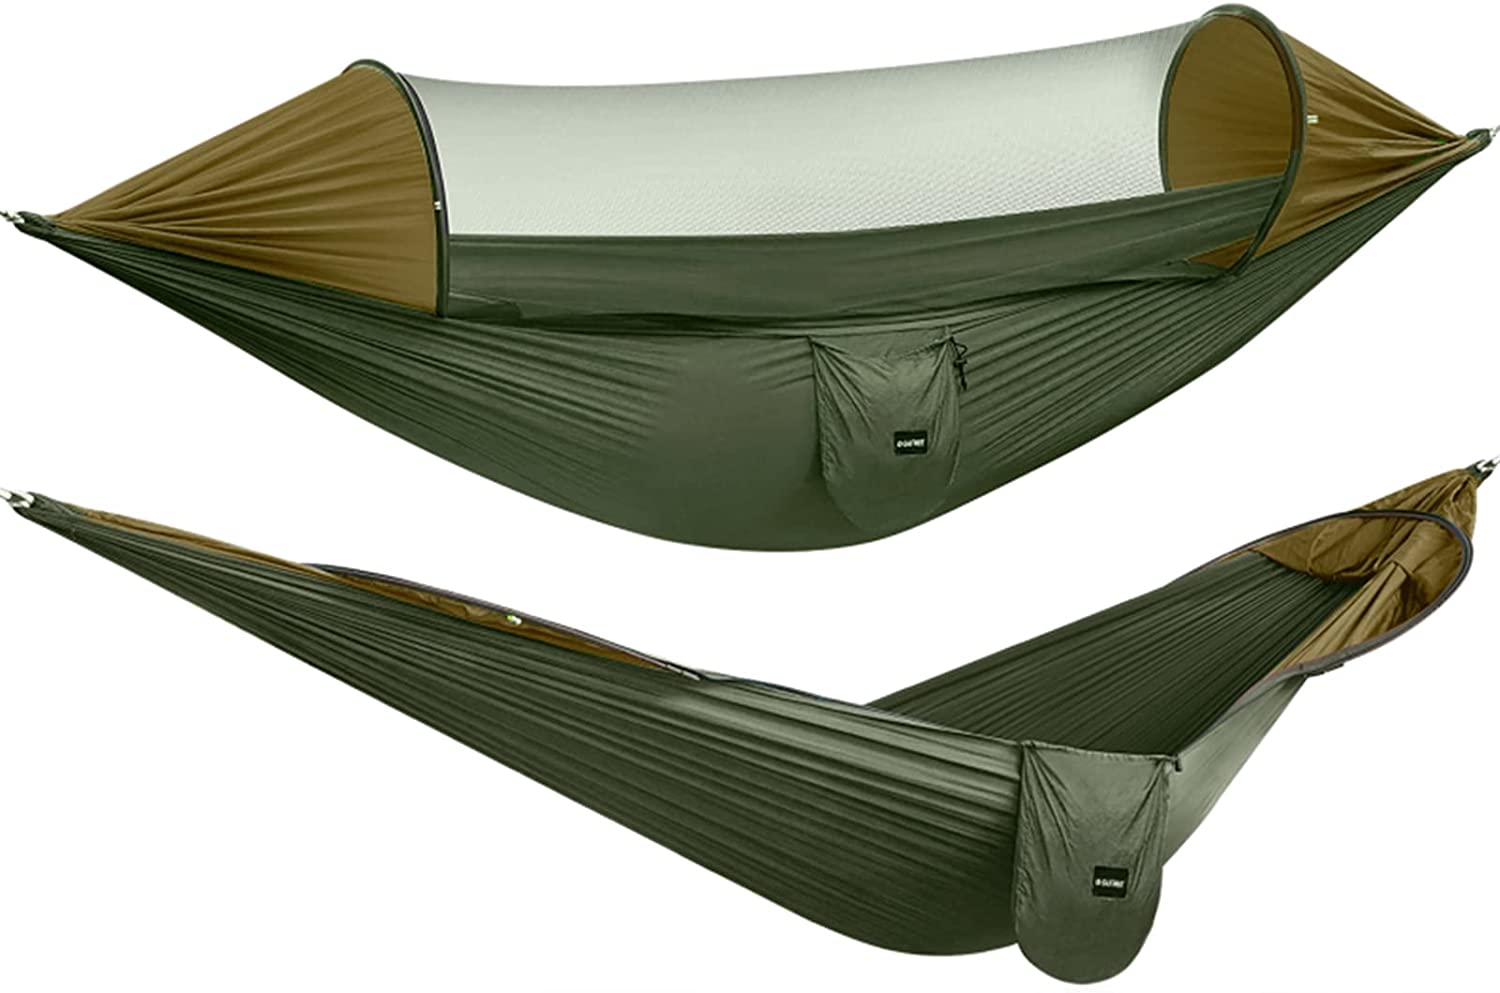 6 Best Hammocks With Mosquito Nets